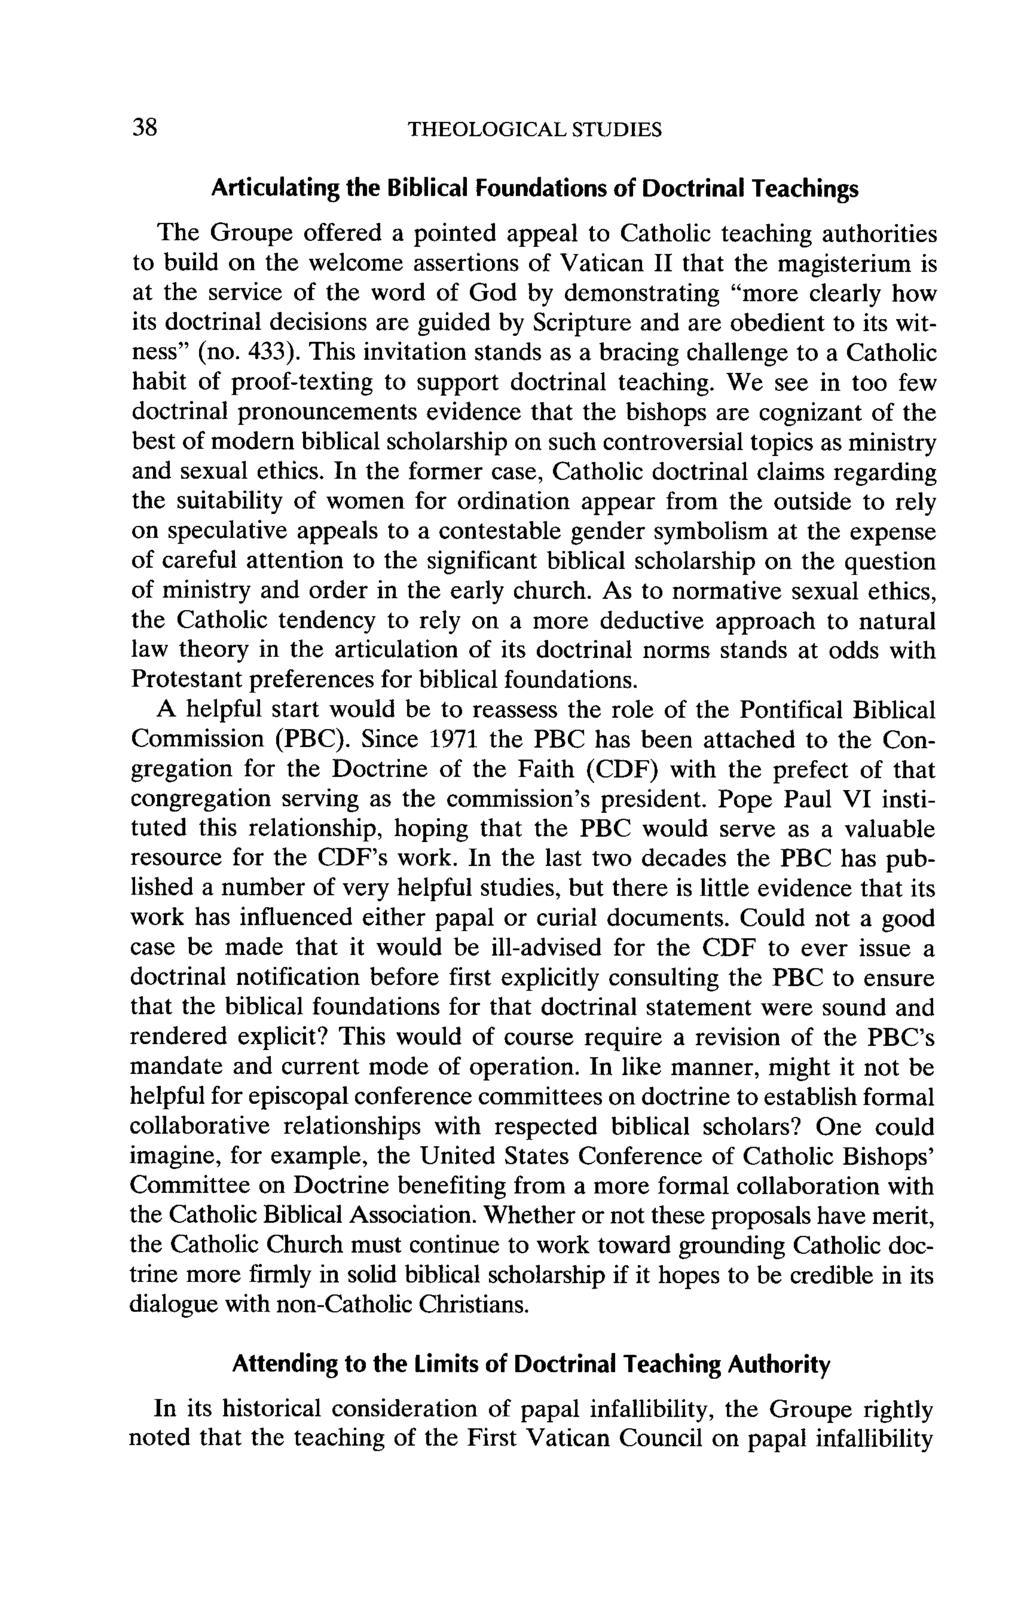 38 THEOLOGICAL STUDIES Articulating the Biblical Foundations of Doctrinal Teachings The Groupe offered a pointed appeal to Catholic teaching authorities to build on the welcome assertions of Vatican